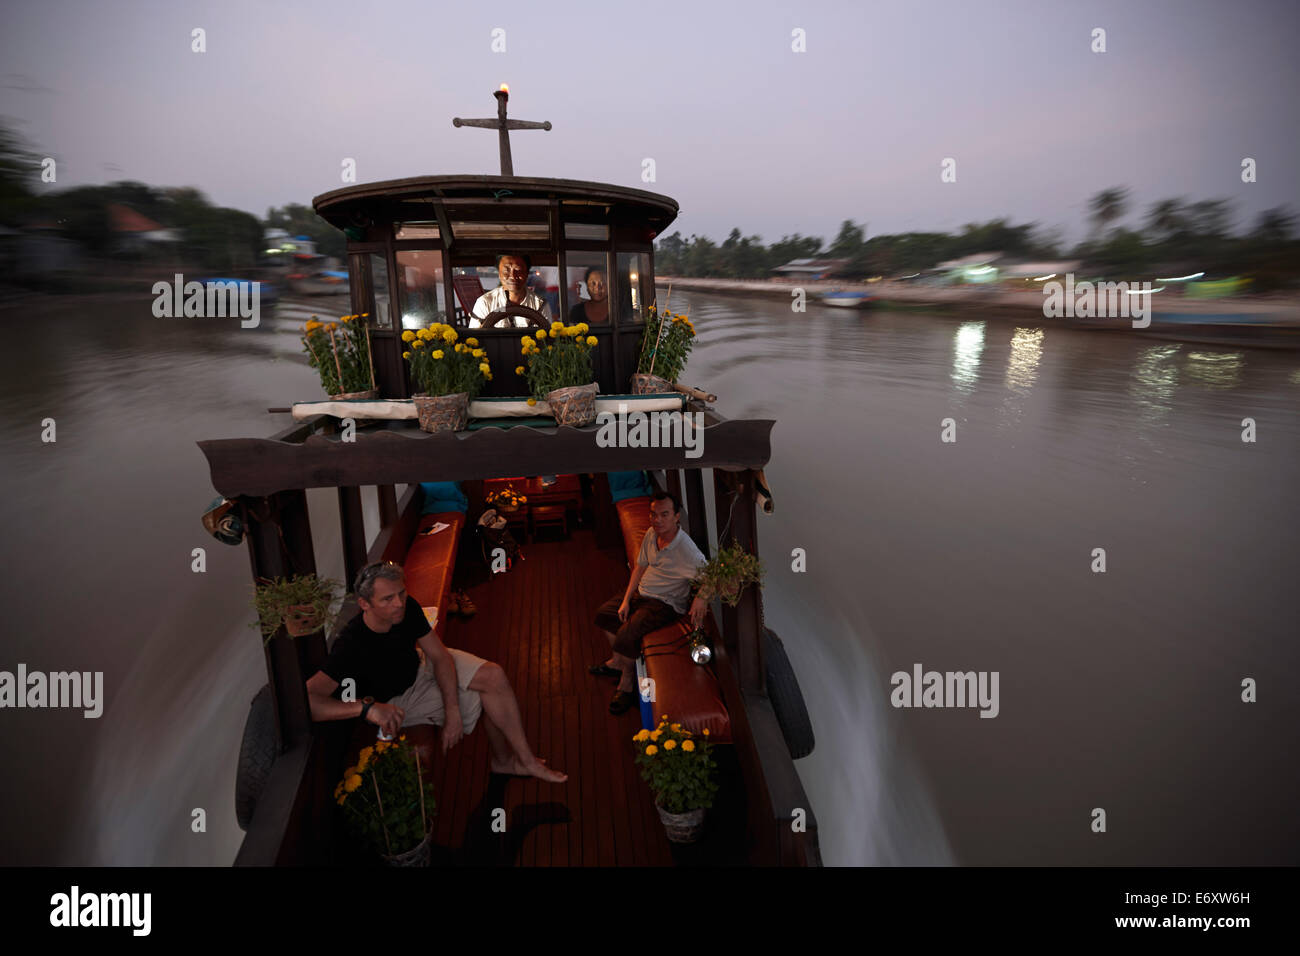 Crew and guests on a houseboat on Mekong river, near Long Xuyen, An Giang Province, Vietnam Stock Photo